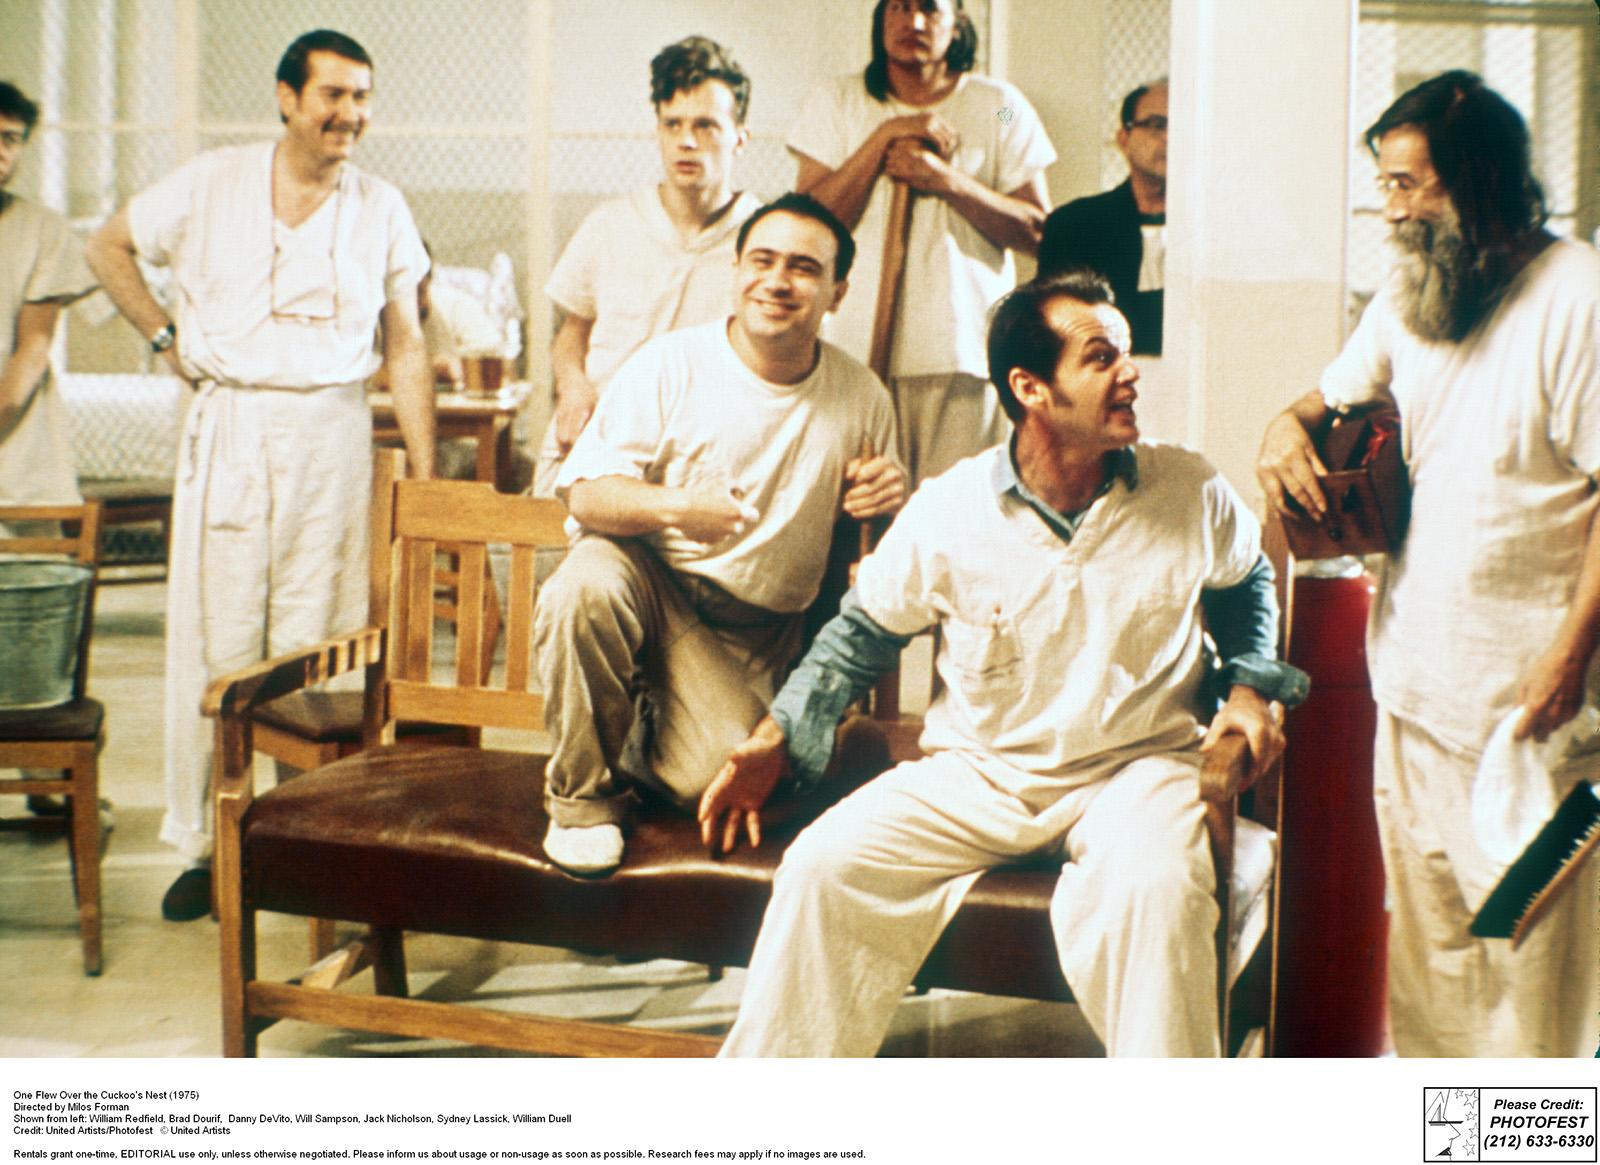 One Flew Over the Cuckoo's Nest. HD Windows Wallpaper